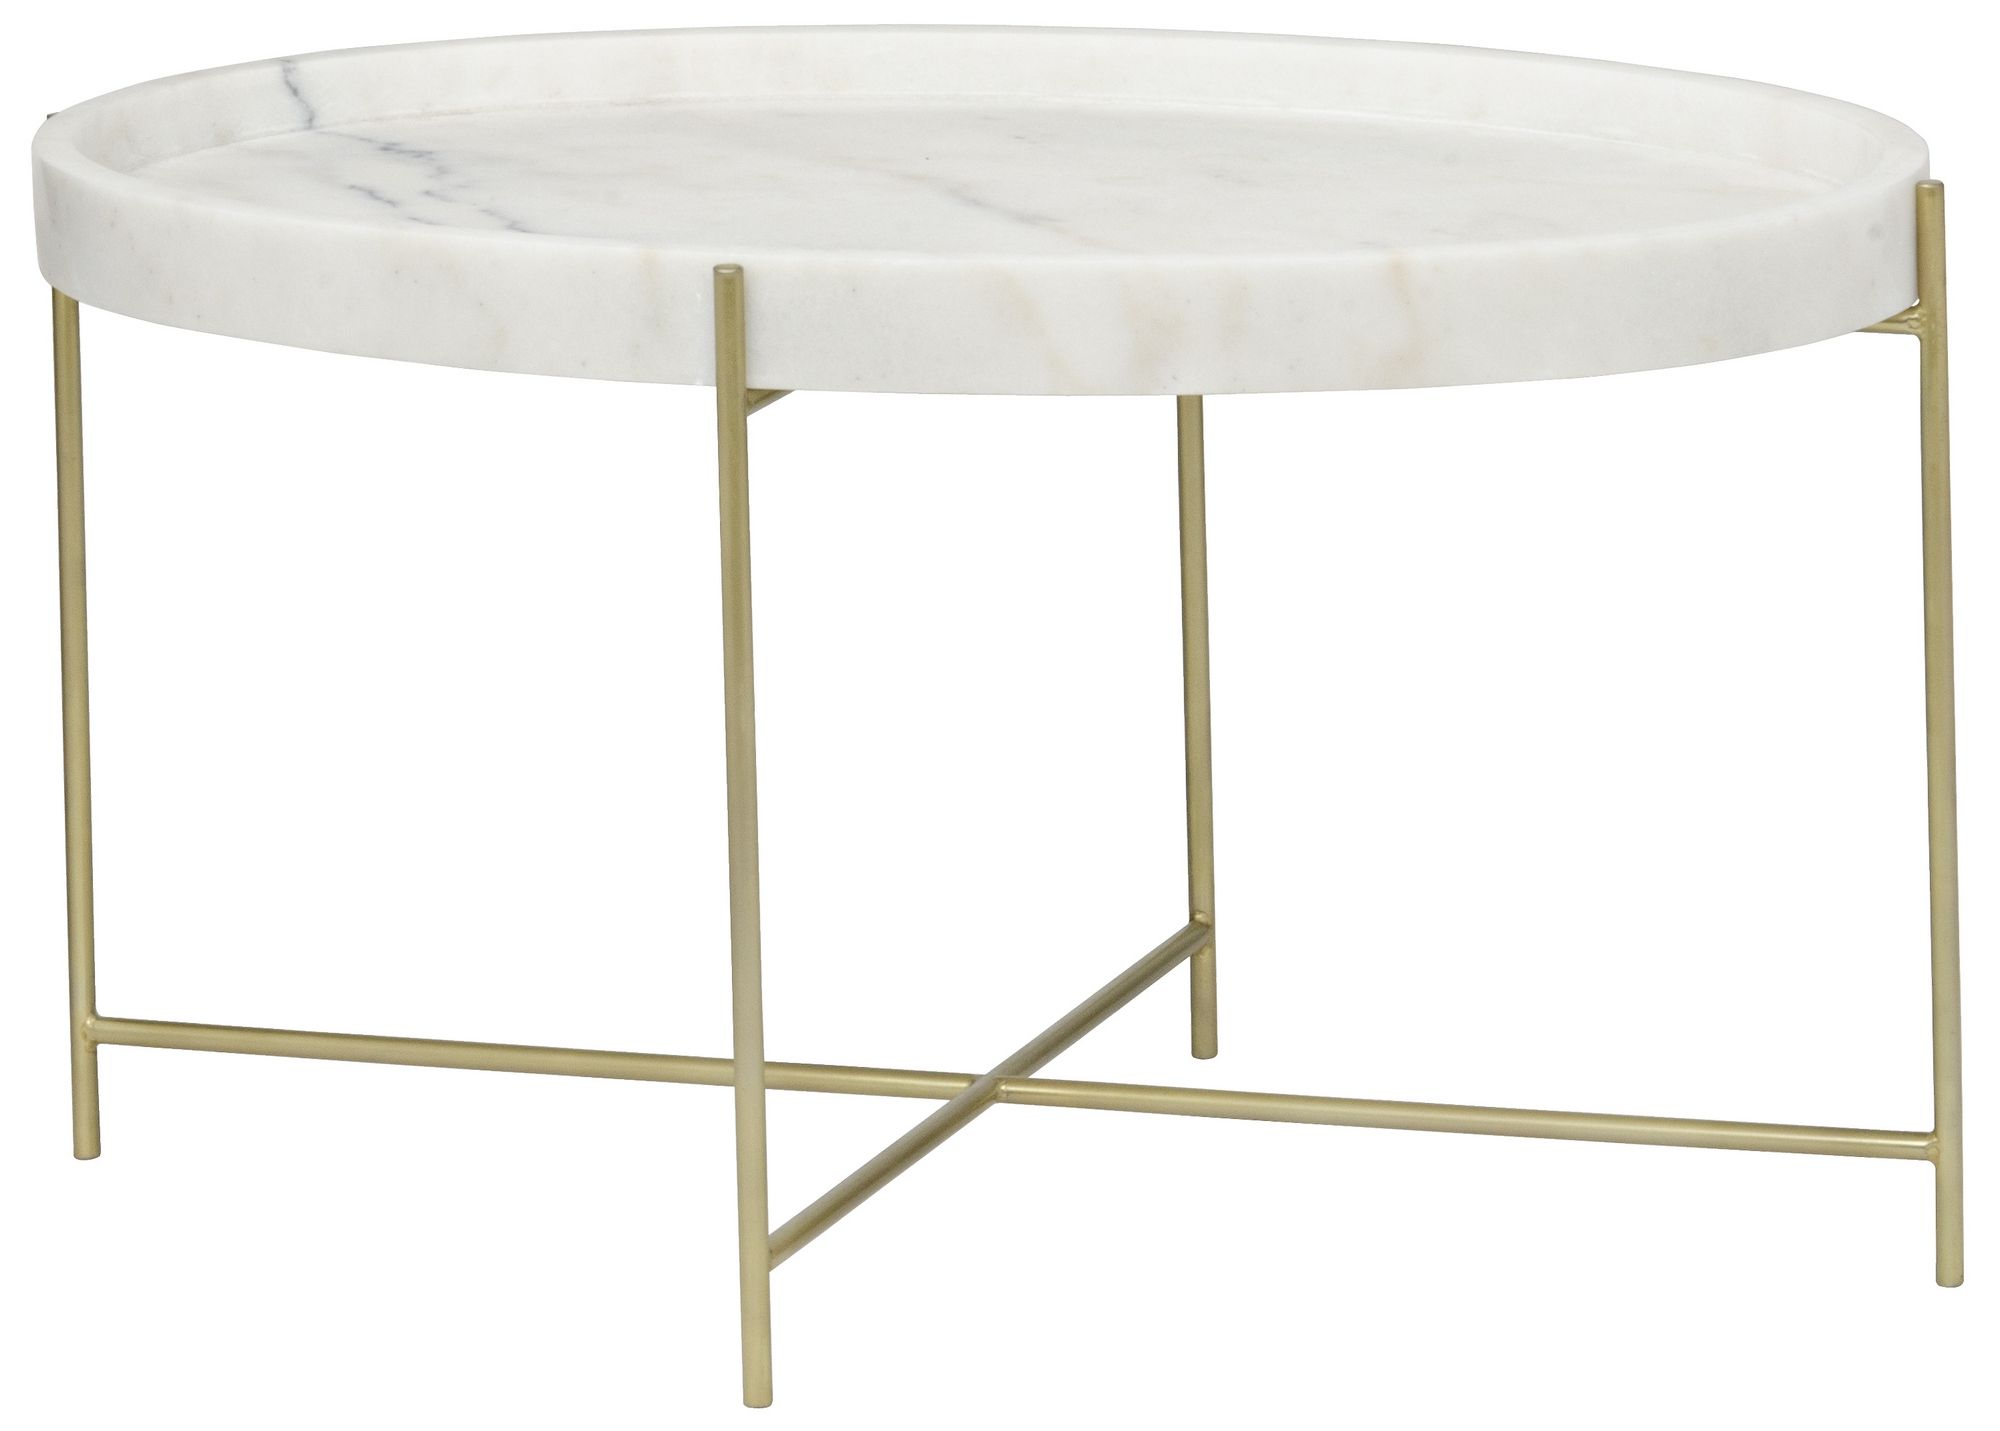 Che Cocktail Table, Antique Brass, Metal And Stone Regarding Best And Newest Antique Cocktail Tables (View 9 of 20)